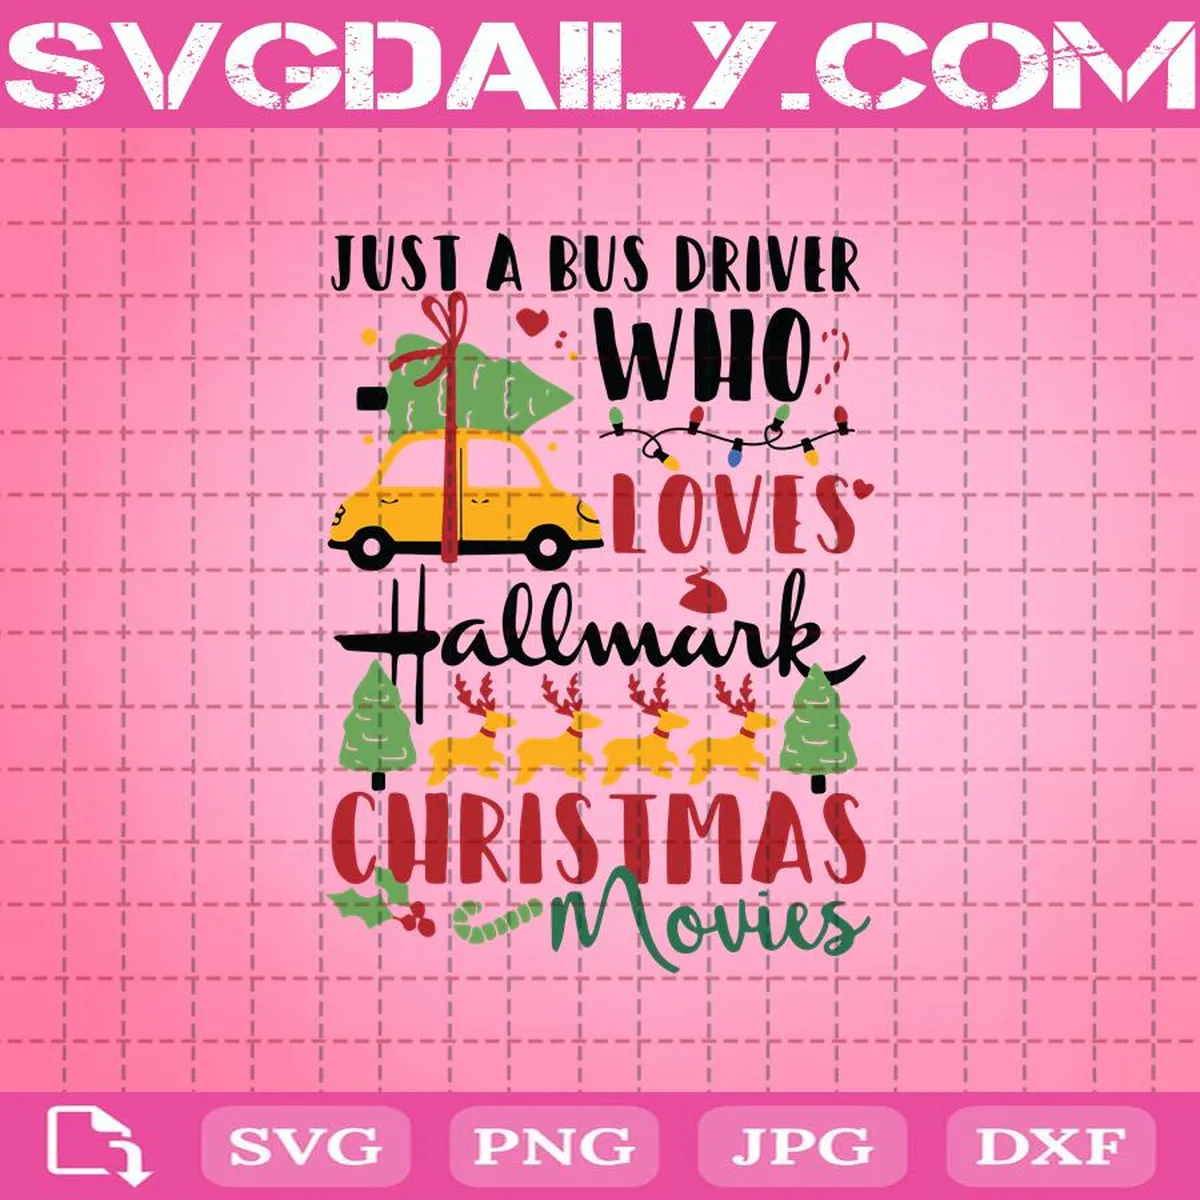 Just A Bus Driver Who Loves Hallmark Christmas Movies Svg, Christmas Svg, Bus Svg, Bus Gift, Christmas Movie Watching Svg